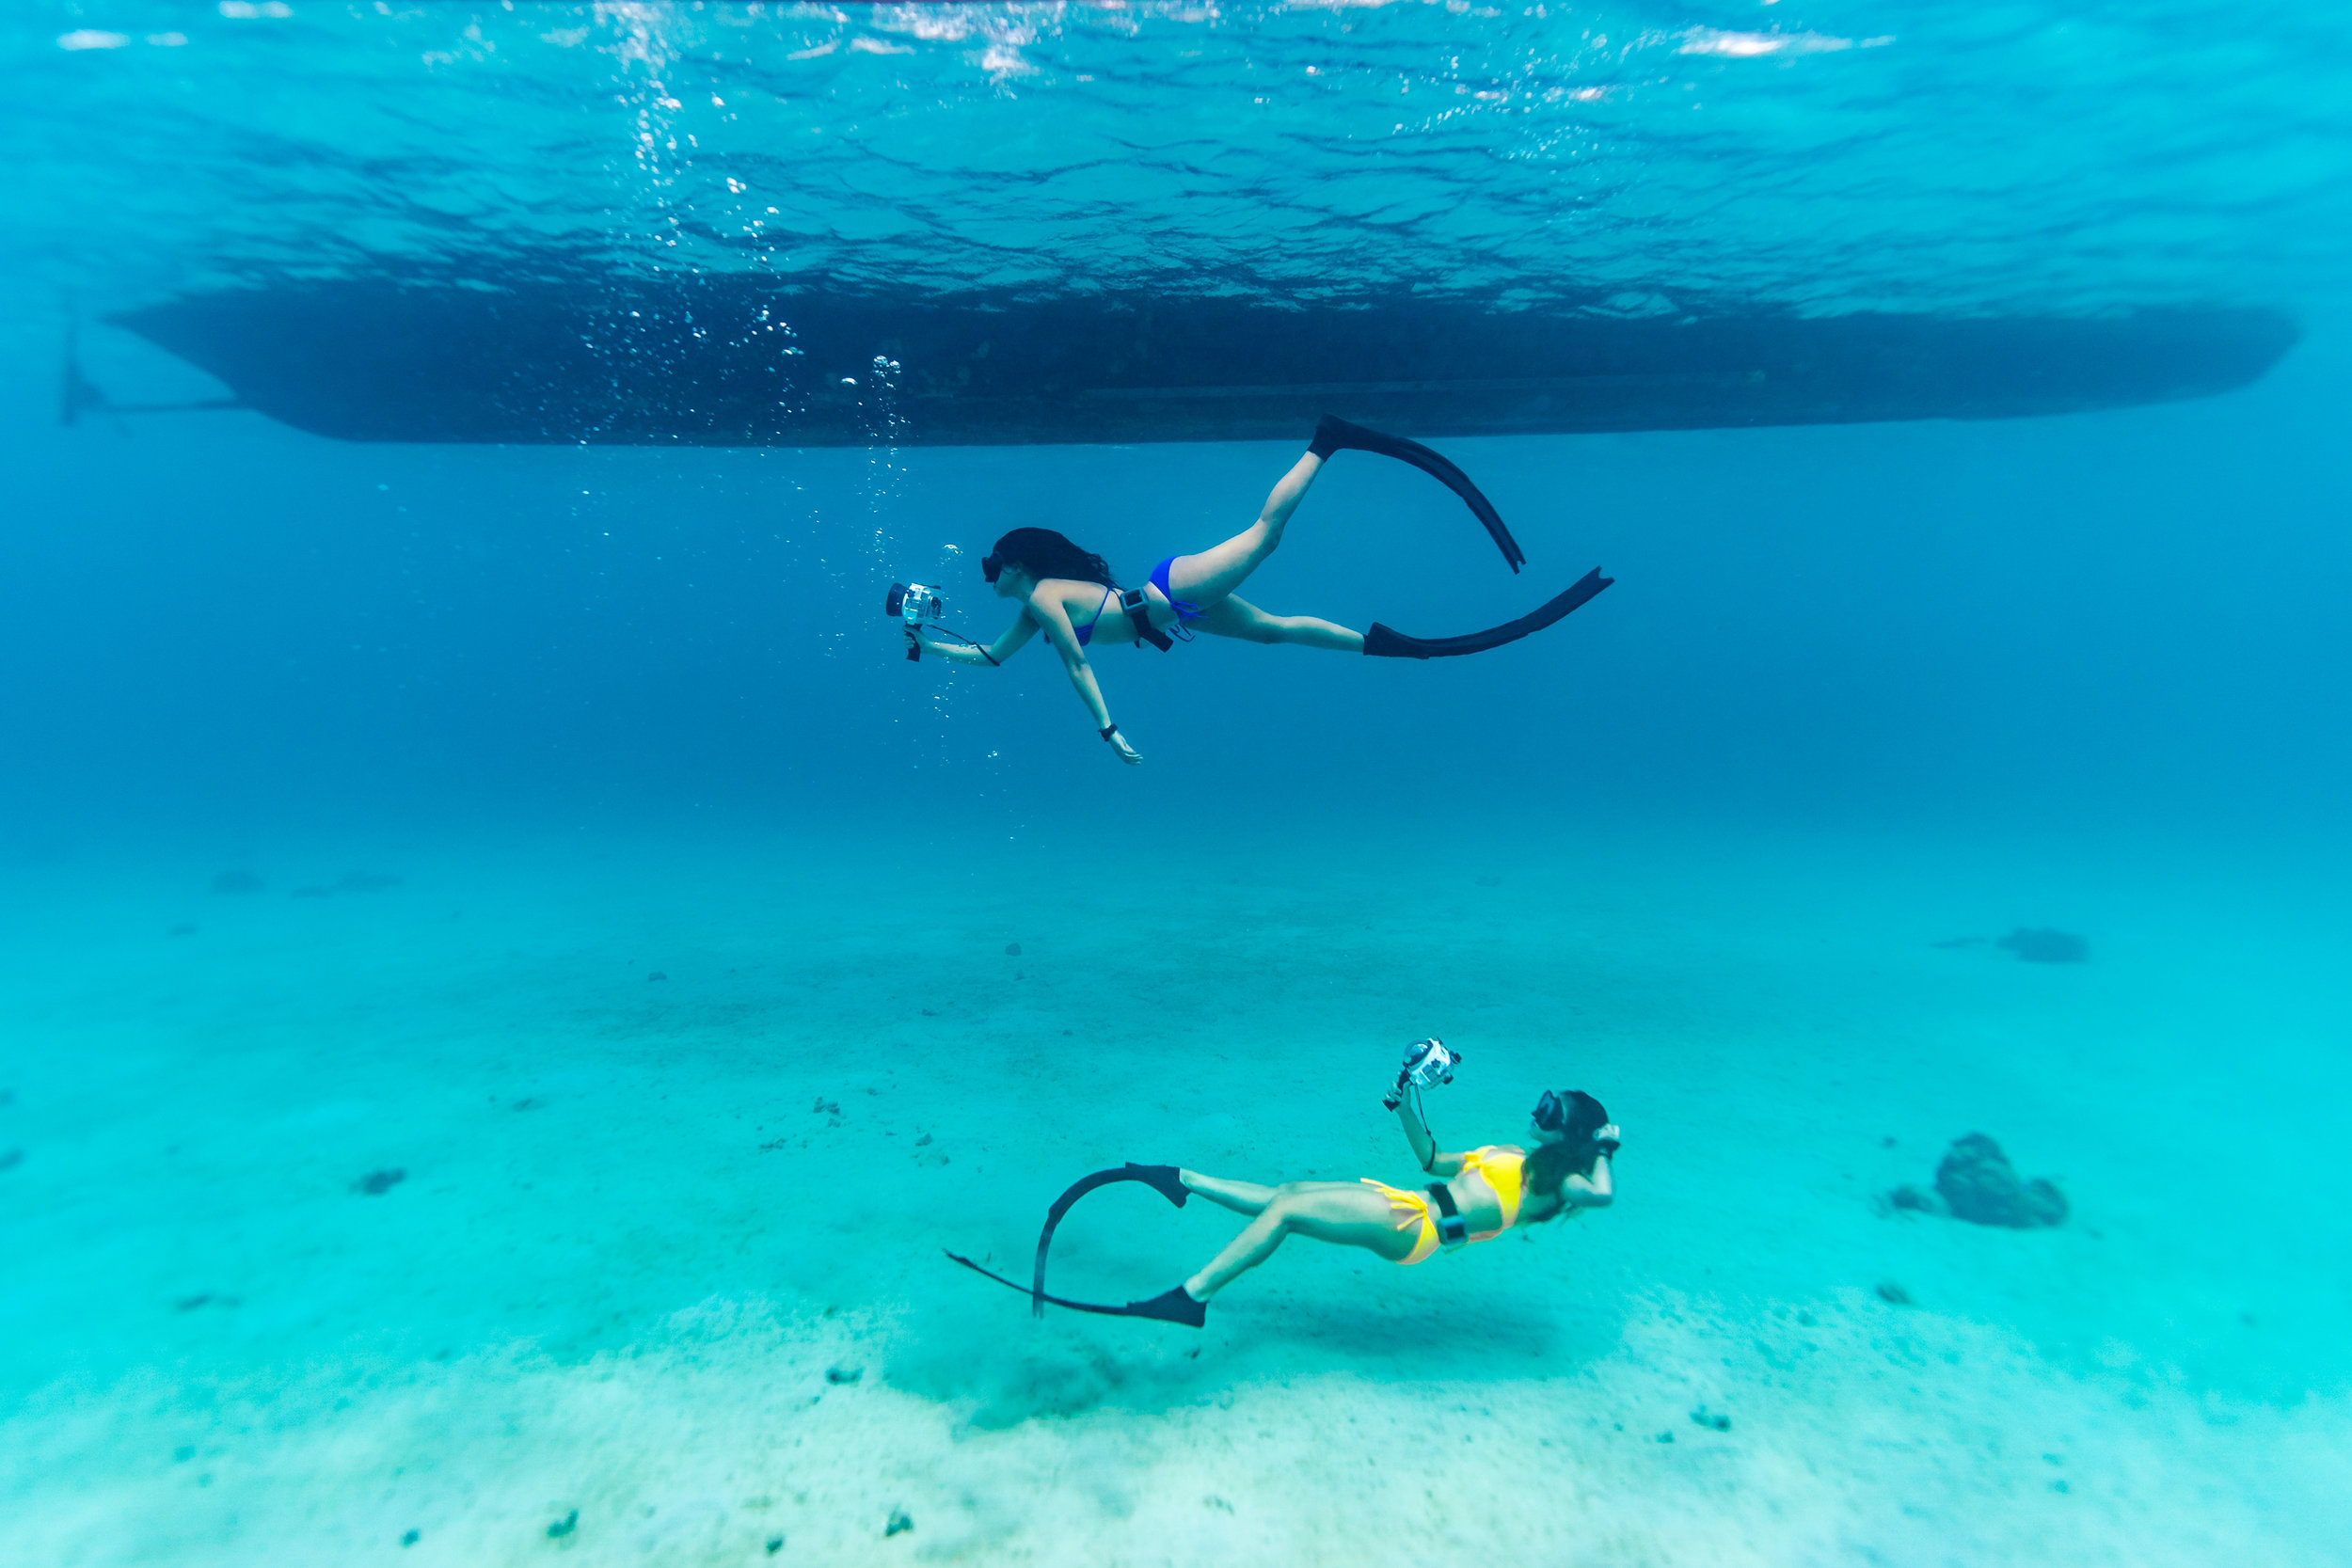 Photograph Like A Pro With Wholesale 20m underwater camera 